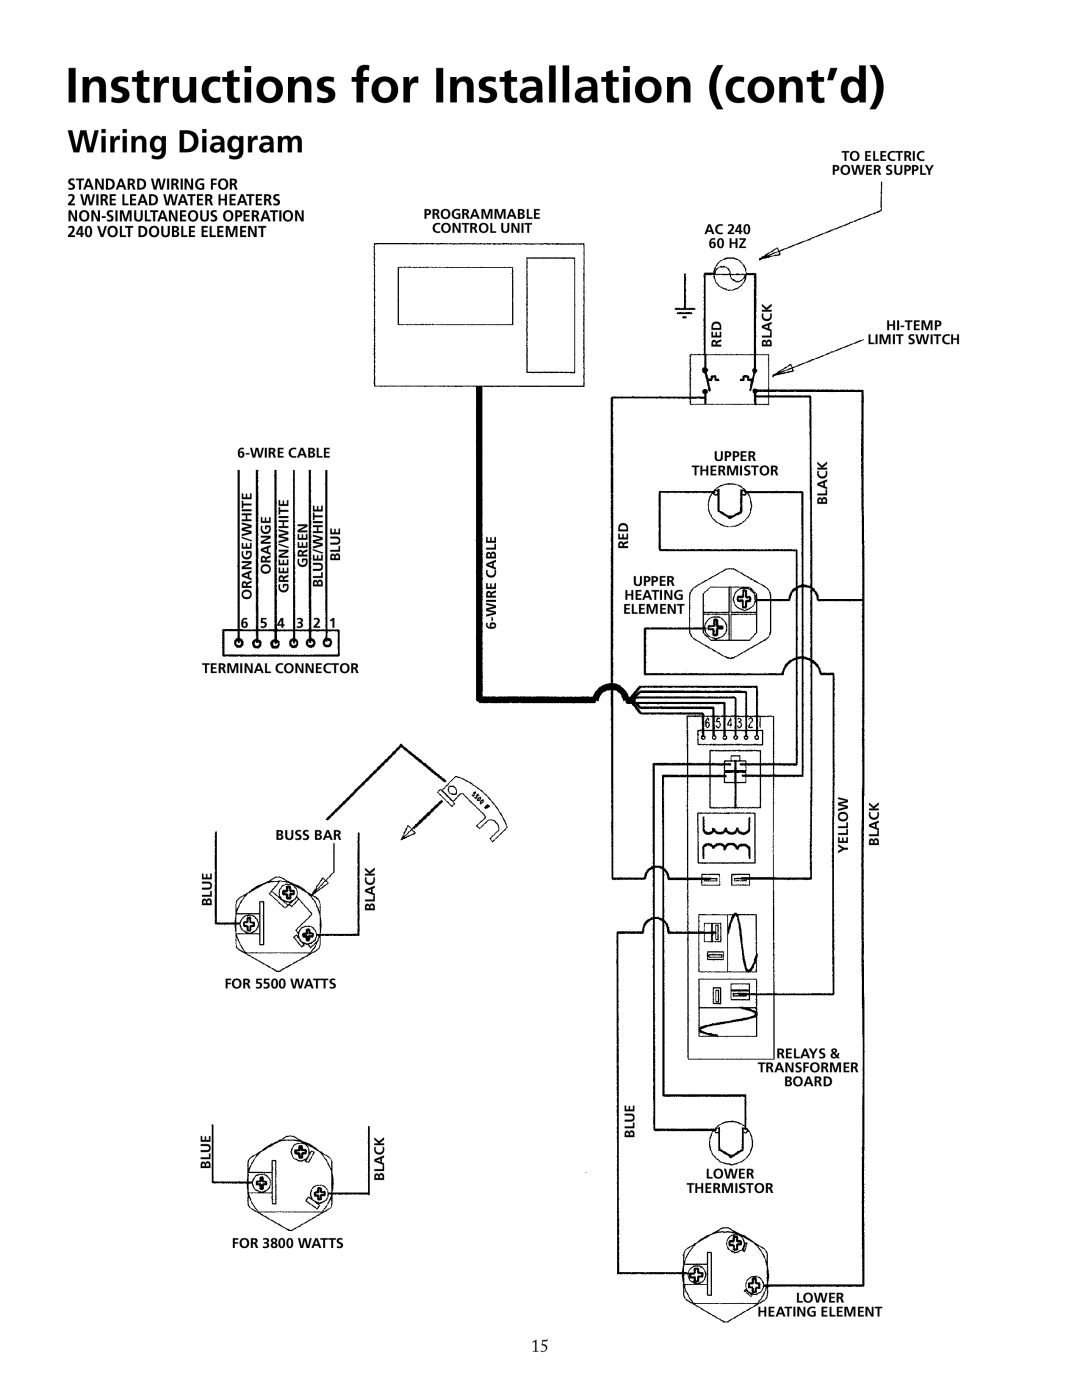 Maytag HRE21282PC, HRE21250PC manual Wiring Diagram, Instructions for Installation cont’d, Standard Wiring For 